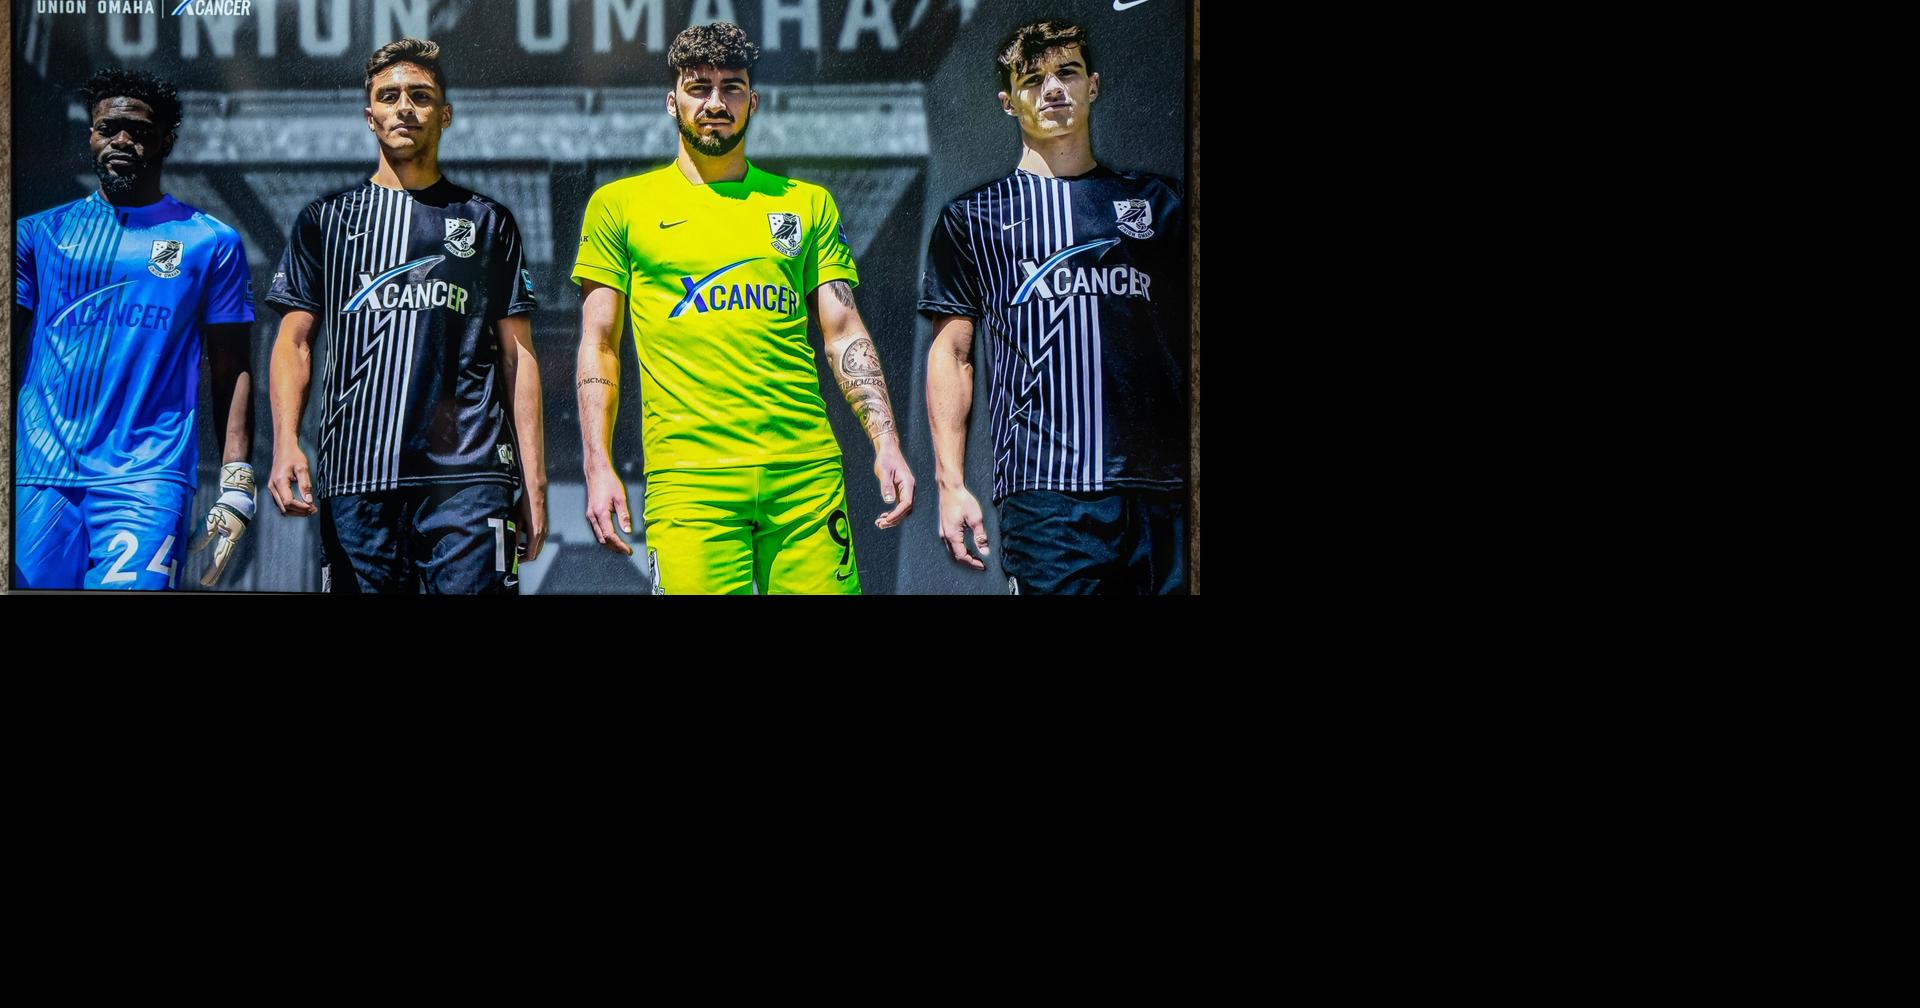 Union Omaha announces XCancer as primary jersey sponsor